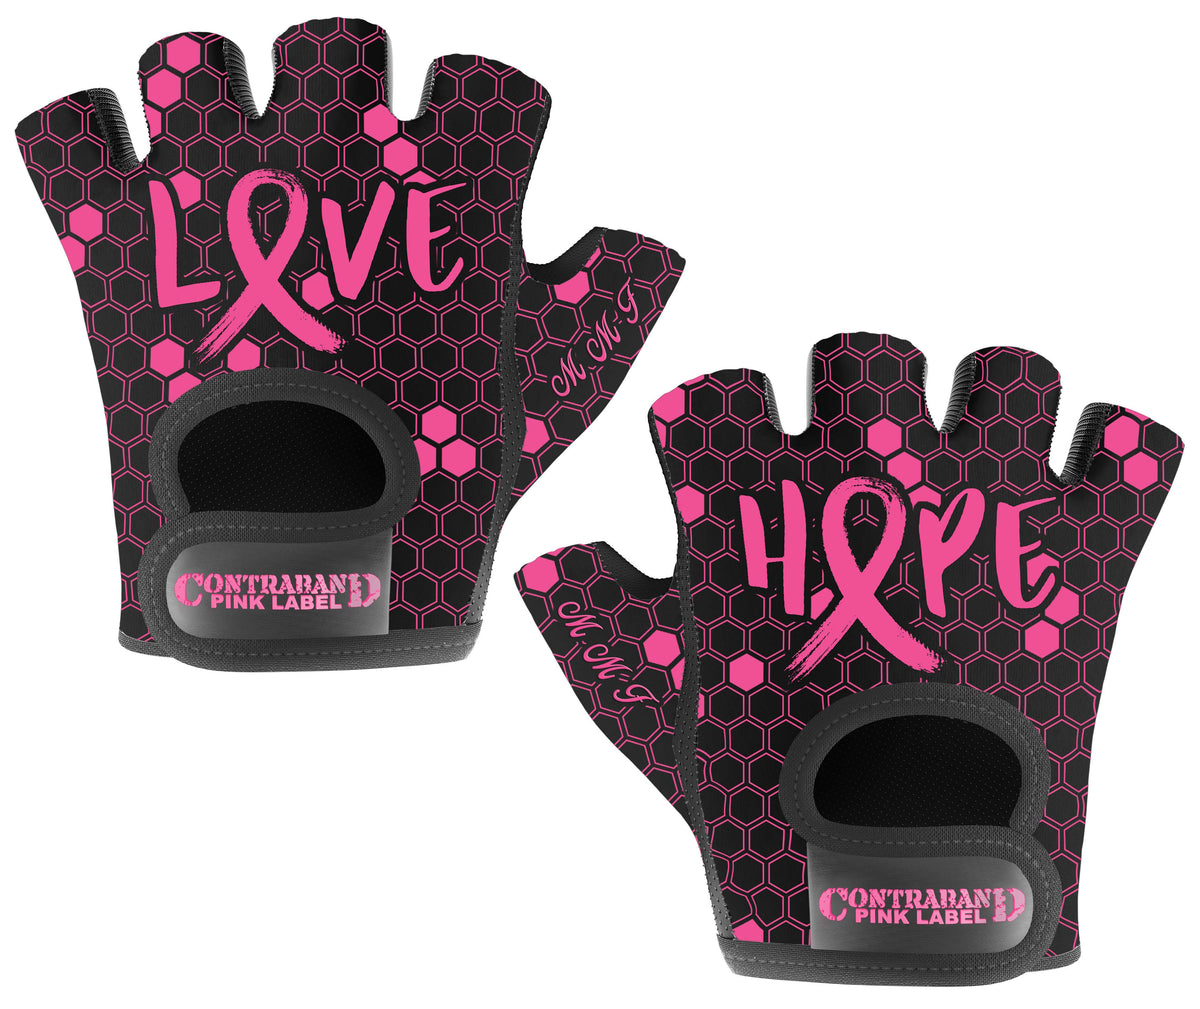 Contraband Pink Label Limited Edition Breast Cancer Hope/Love Print Lifting & Rowing Gloves w/ Grip-Lock™ Padding (Pair)